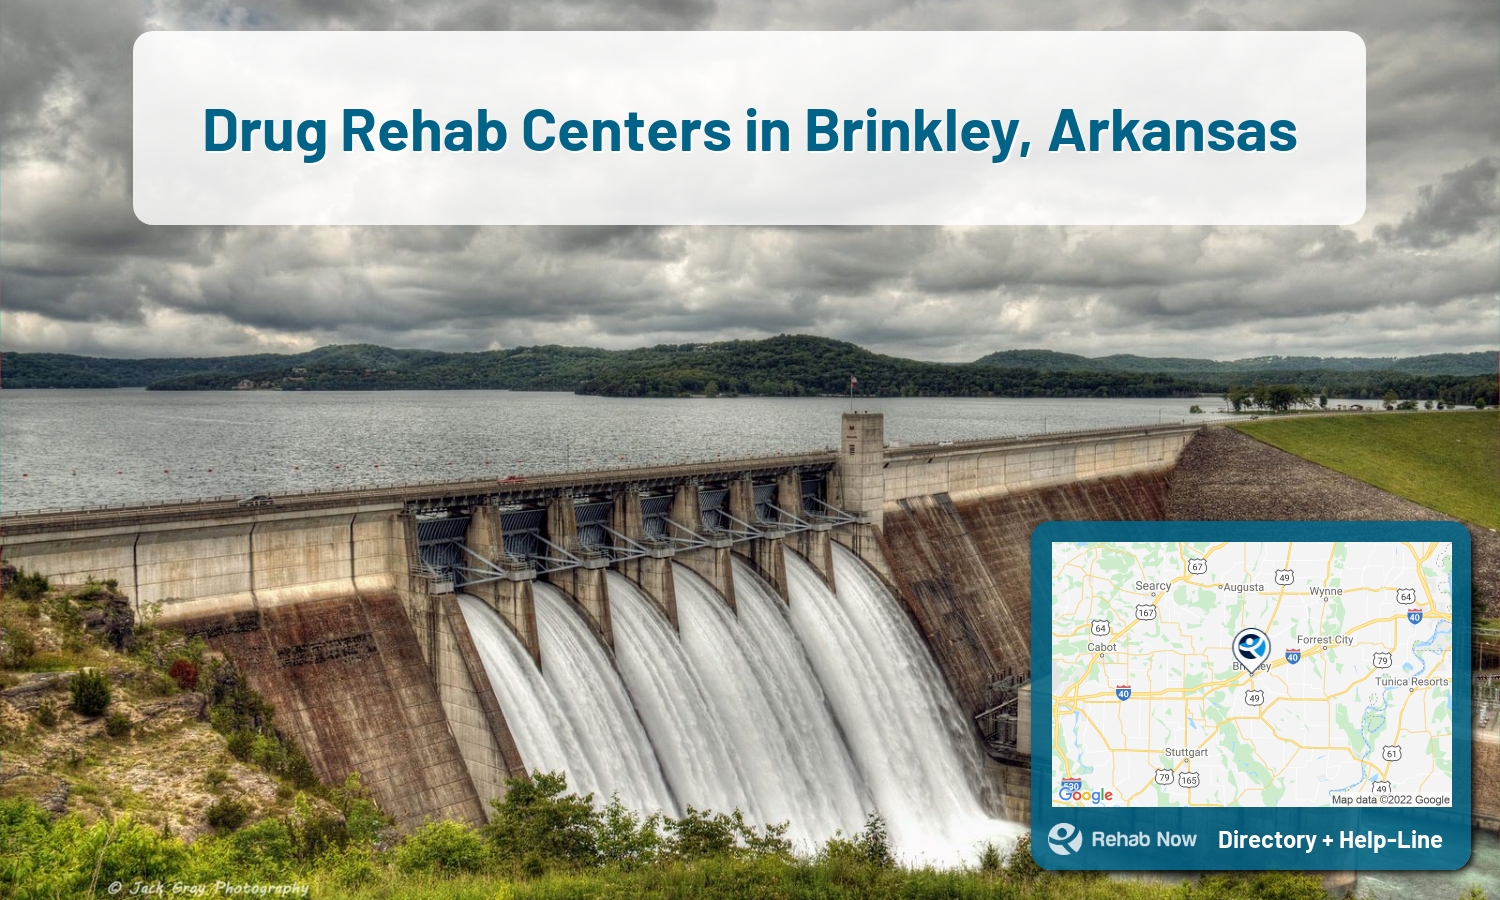 Find drug rehab and alcohol treatment services in Brinkley. Our experts help you find a center in Brinkley, Arkansas